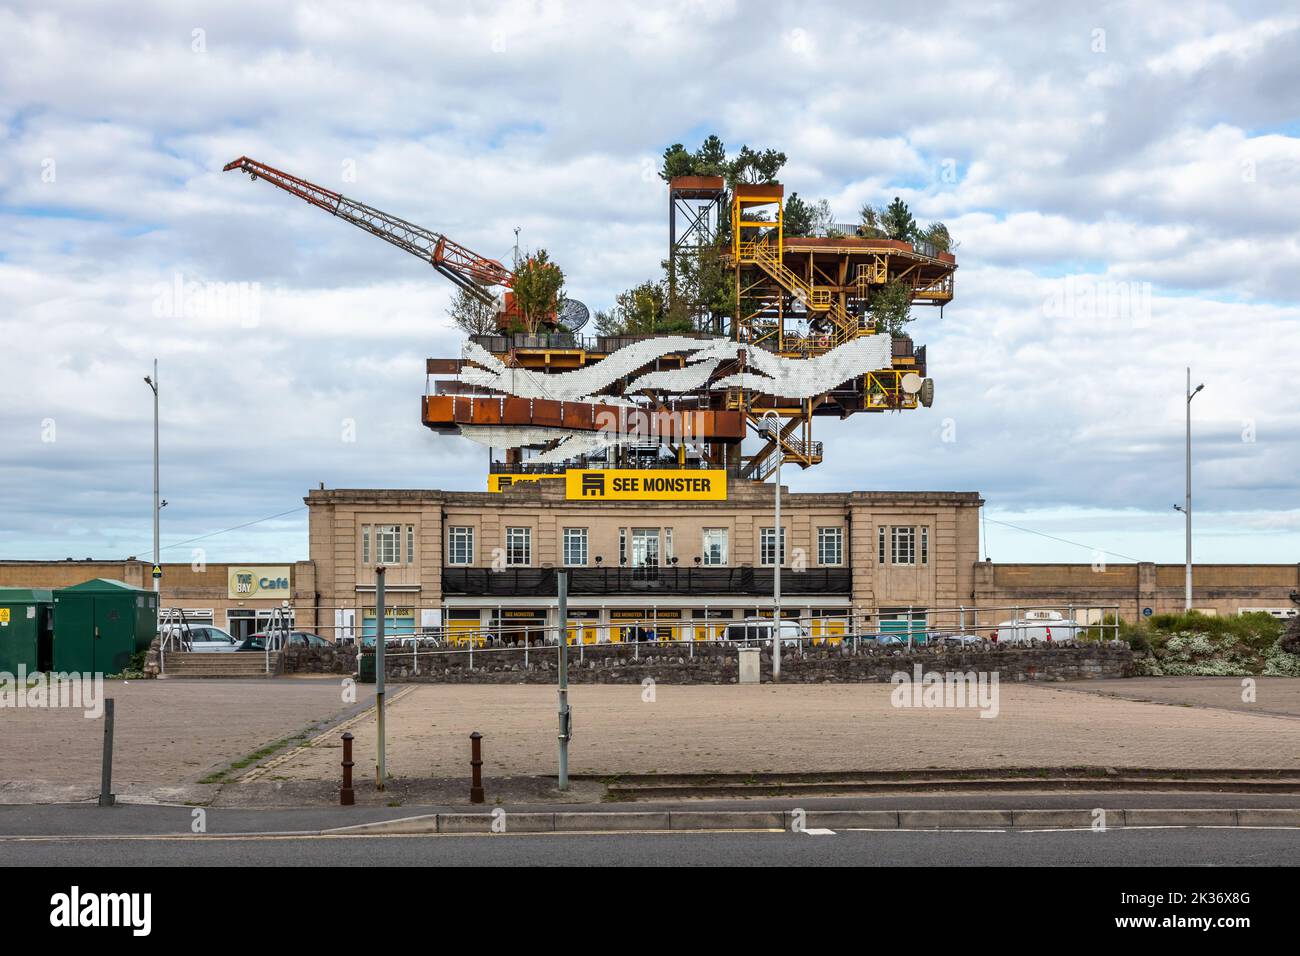 See Monster is a retired oil rig from the North Sea now transformed into a public artwork. A 35 metre tall structure, Weston Super Mare, Somerset, UK Stock Photo